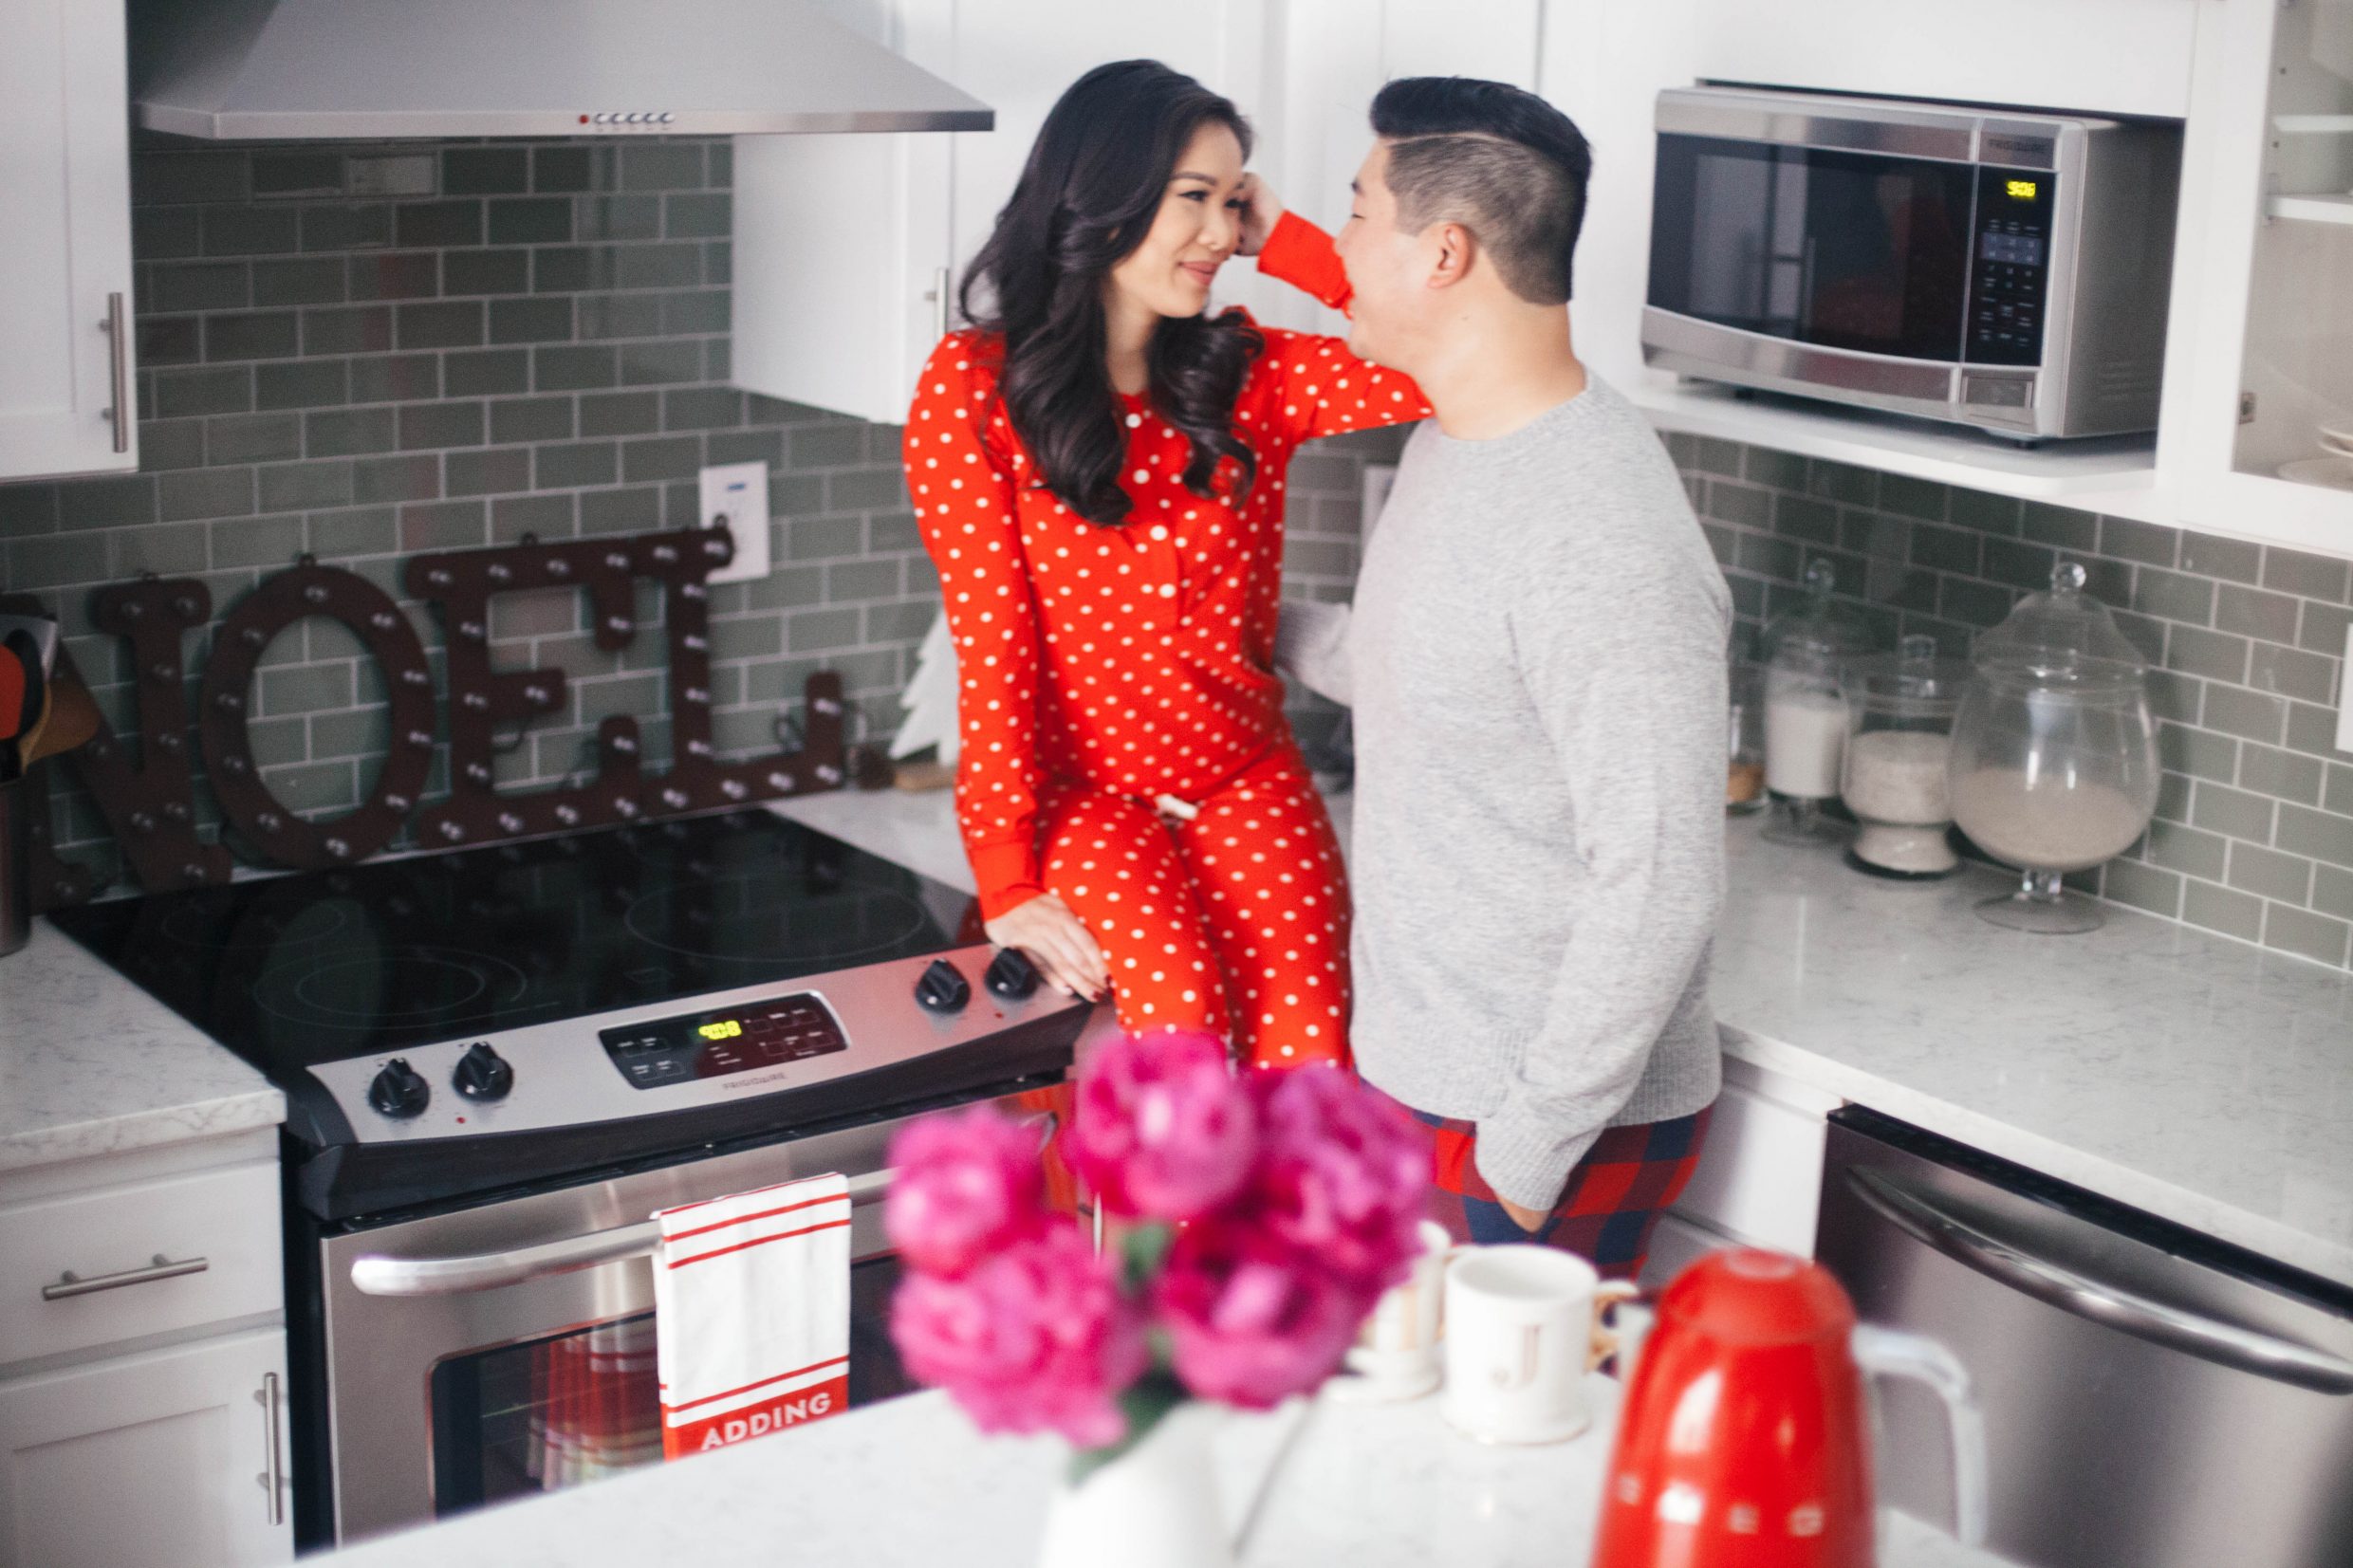 pjs,festive,christmas,red,polka,dot,pajamas,pjs,adding,the,sauce,kate,spade,towel,jcrew,his,hers,home,white,kitchen,lifestyle,anthropologie,norfolk,virginia,living,mornings,in,best,biscuit,